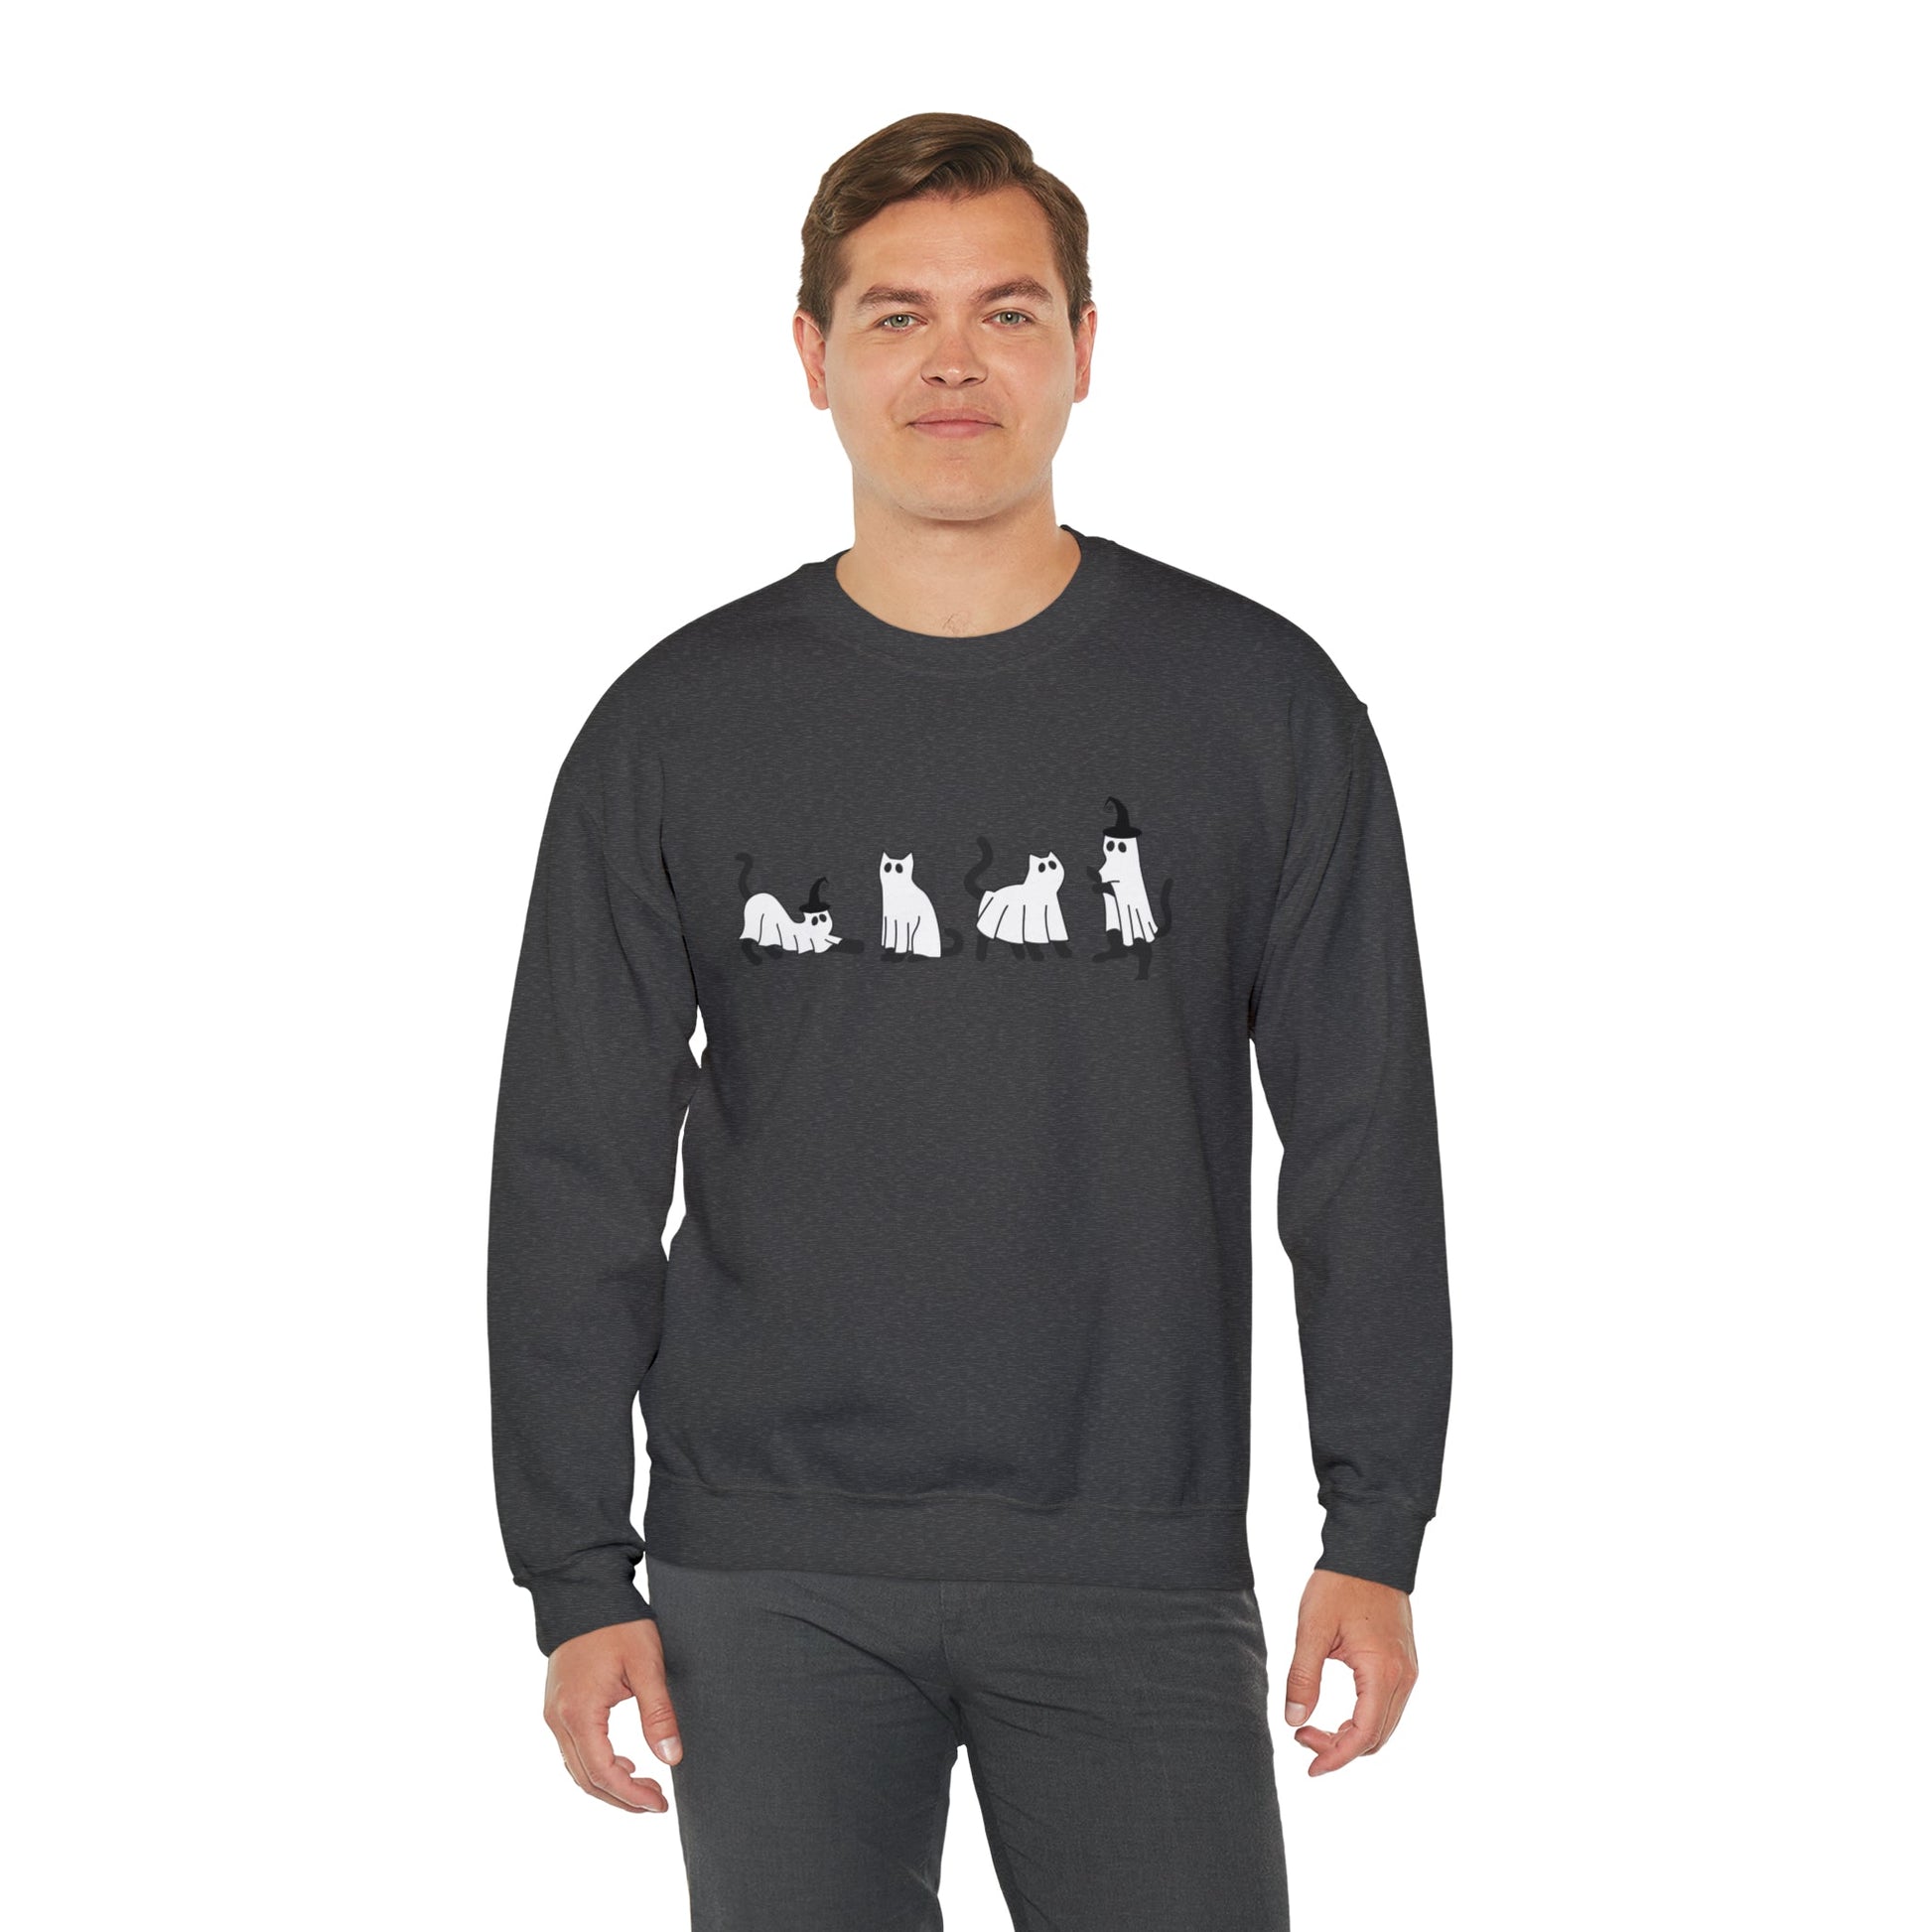 Get trendy with Cat Ghosts ™ Crewneck Sweatshir - Sweatshirt available at Good Gift Company. Grab yours for $32 today!